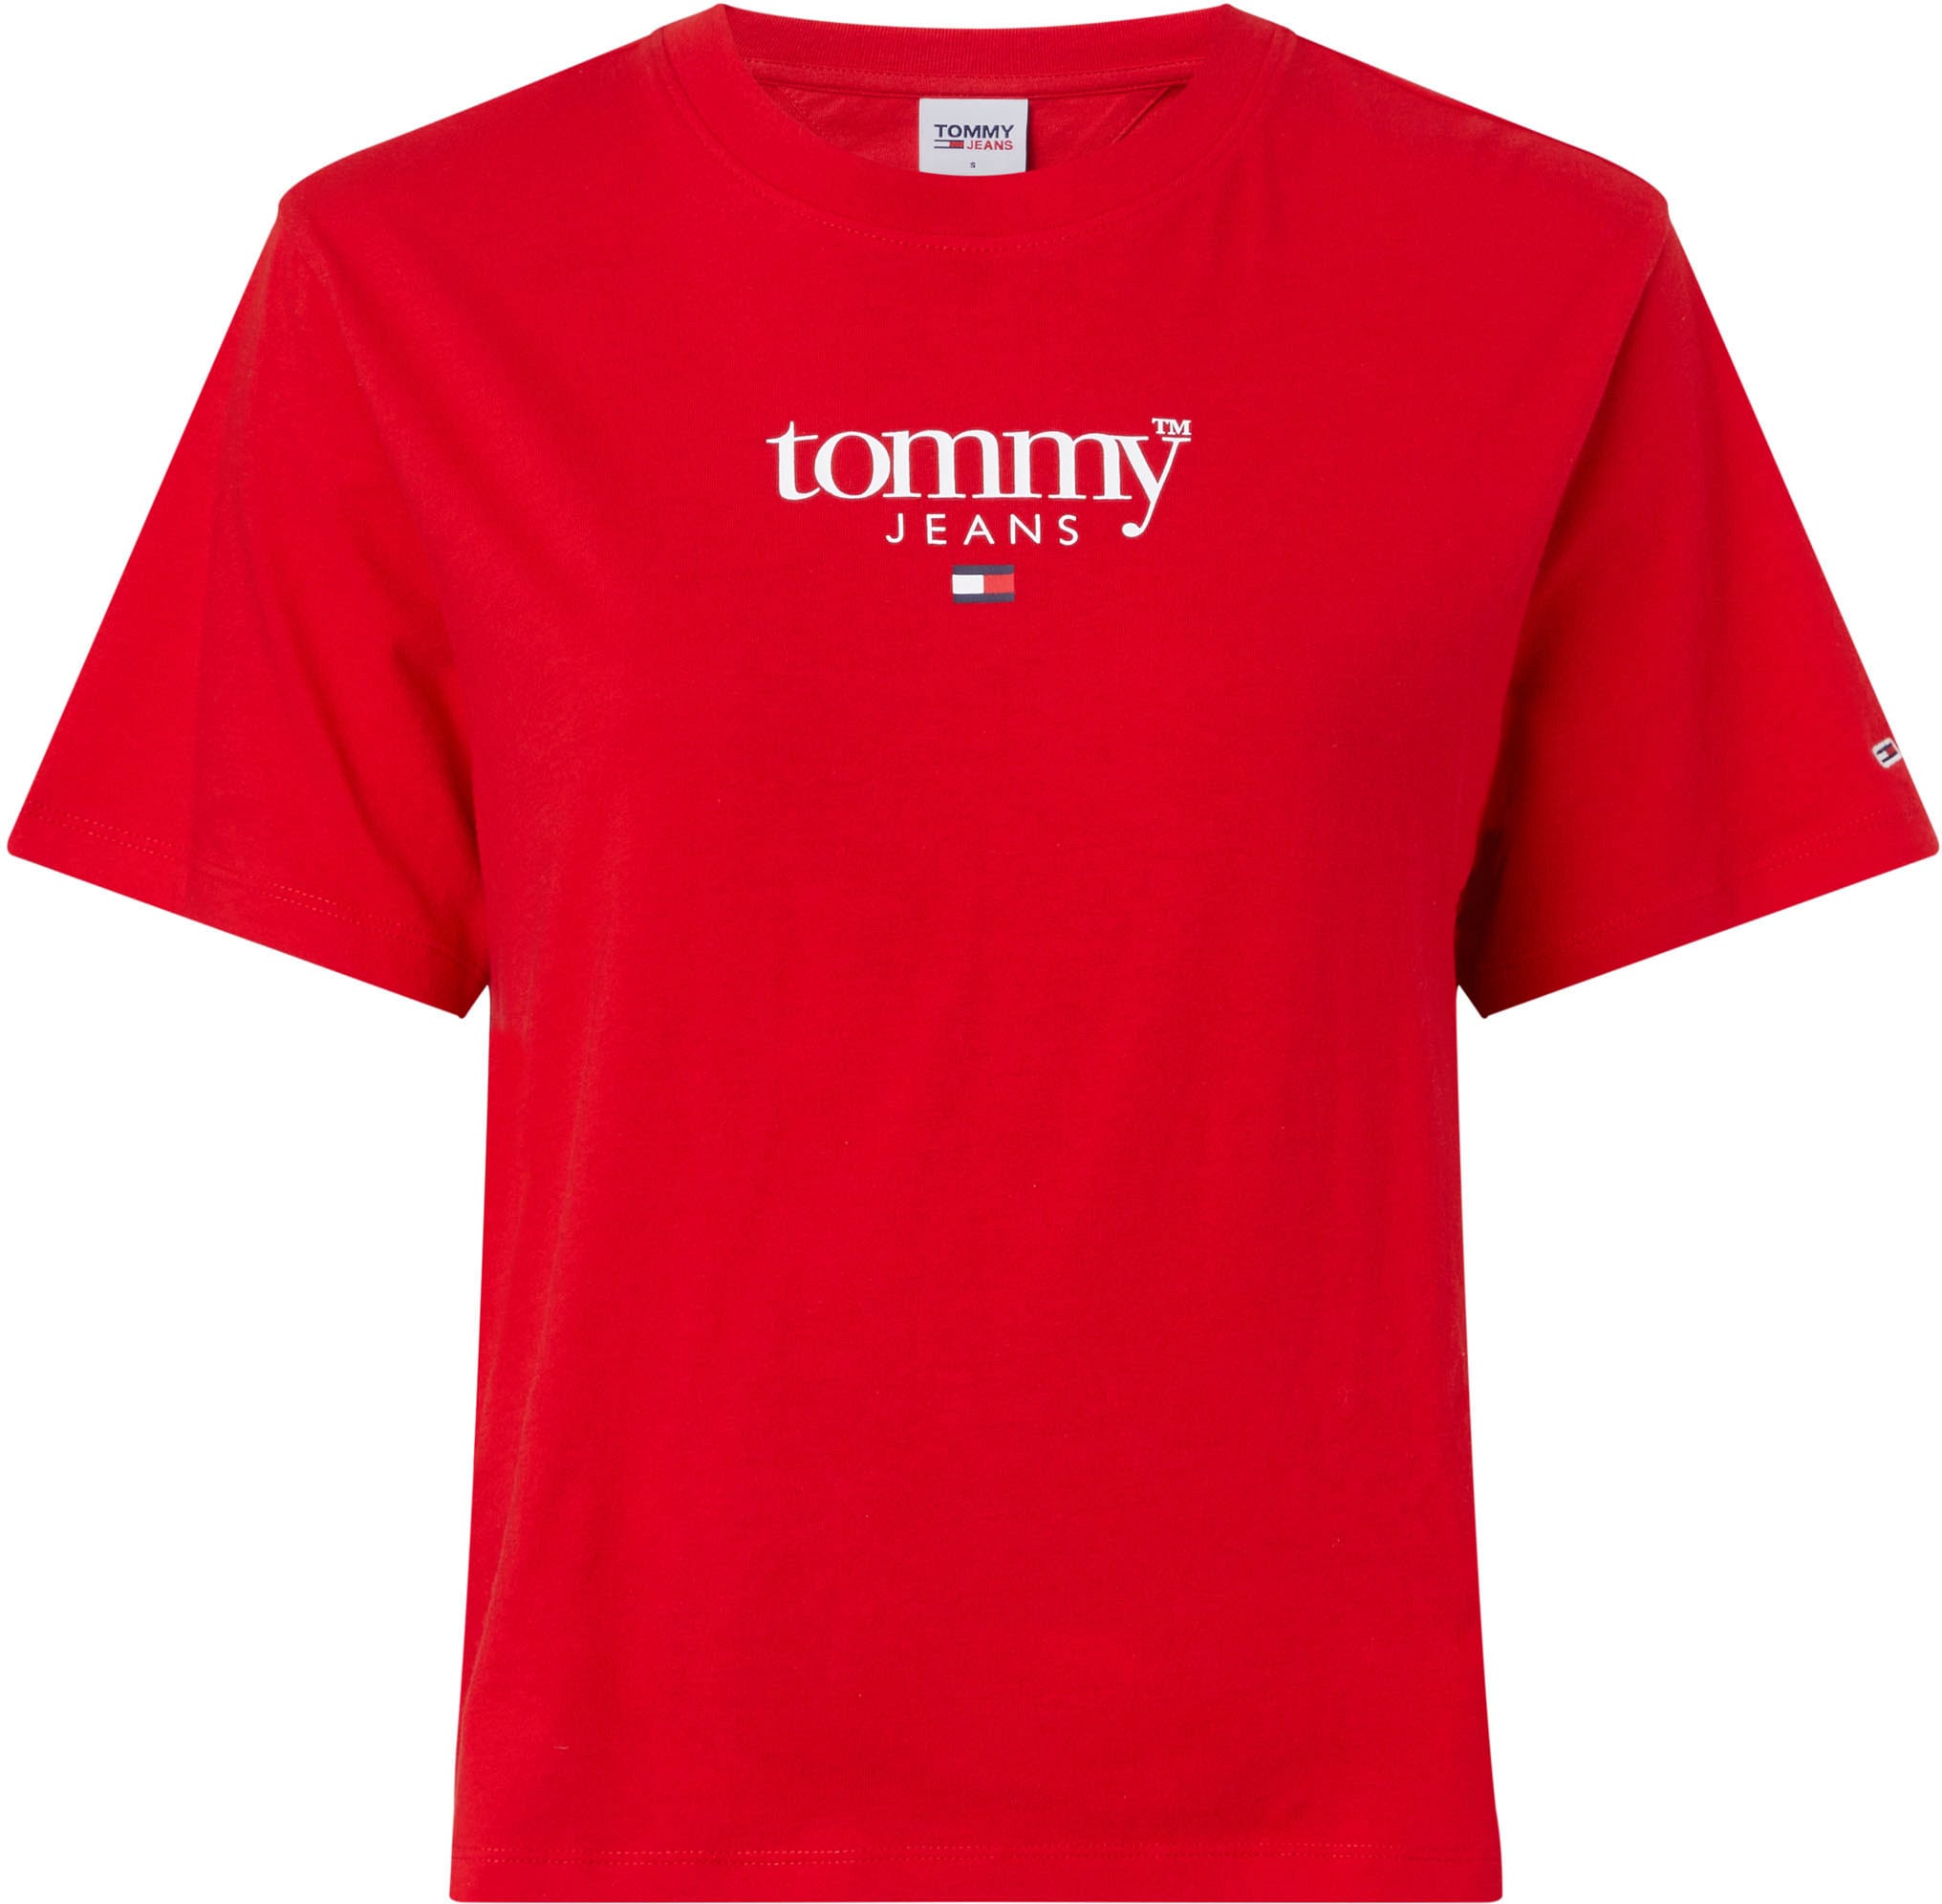 Tommy Jeans Kurzarmshirt Tommy CLASSIC SS«, gestickter ESSENTIAL OTTO Logo-Flag 1 mit Jeans LOGO »TJW bei online